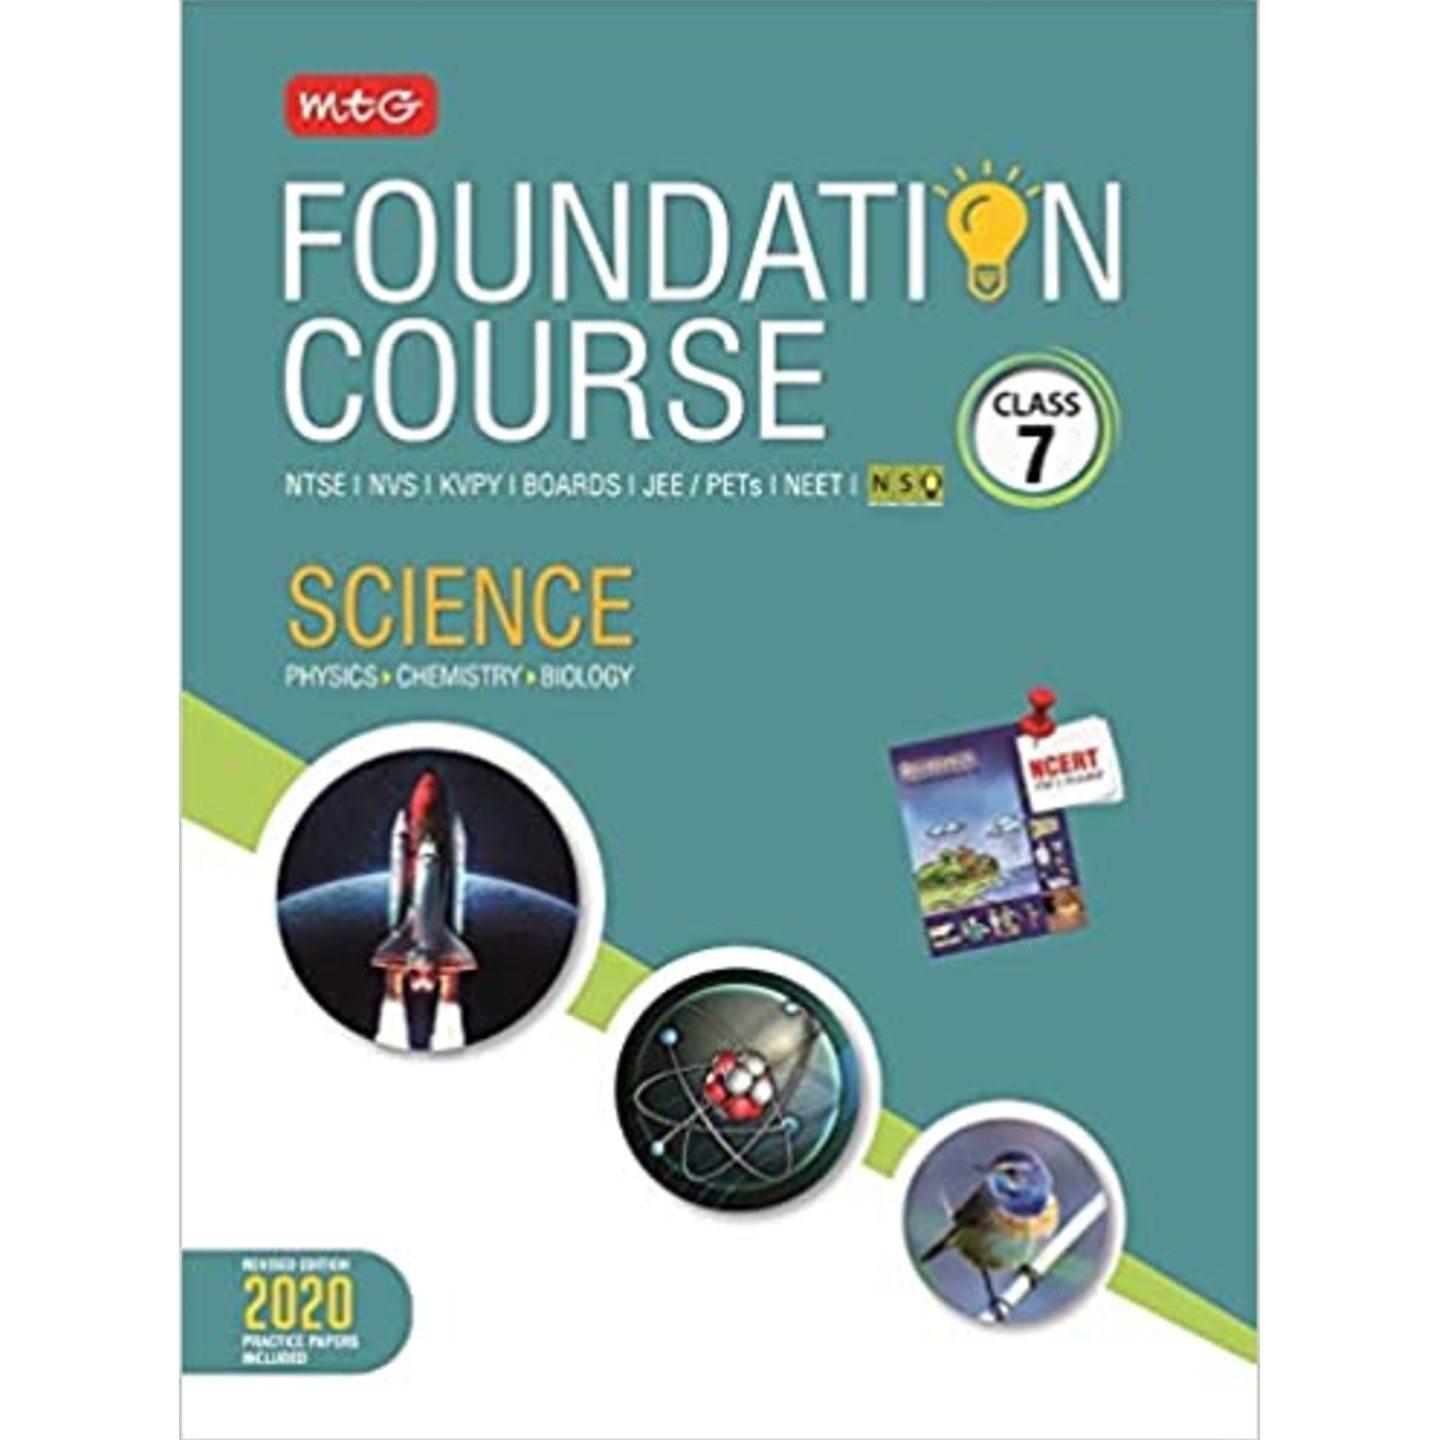 Science Foundation Course For JEENEETNSOOlympiad -Class 7